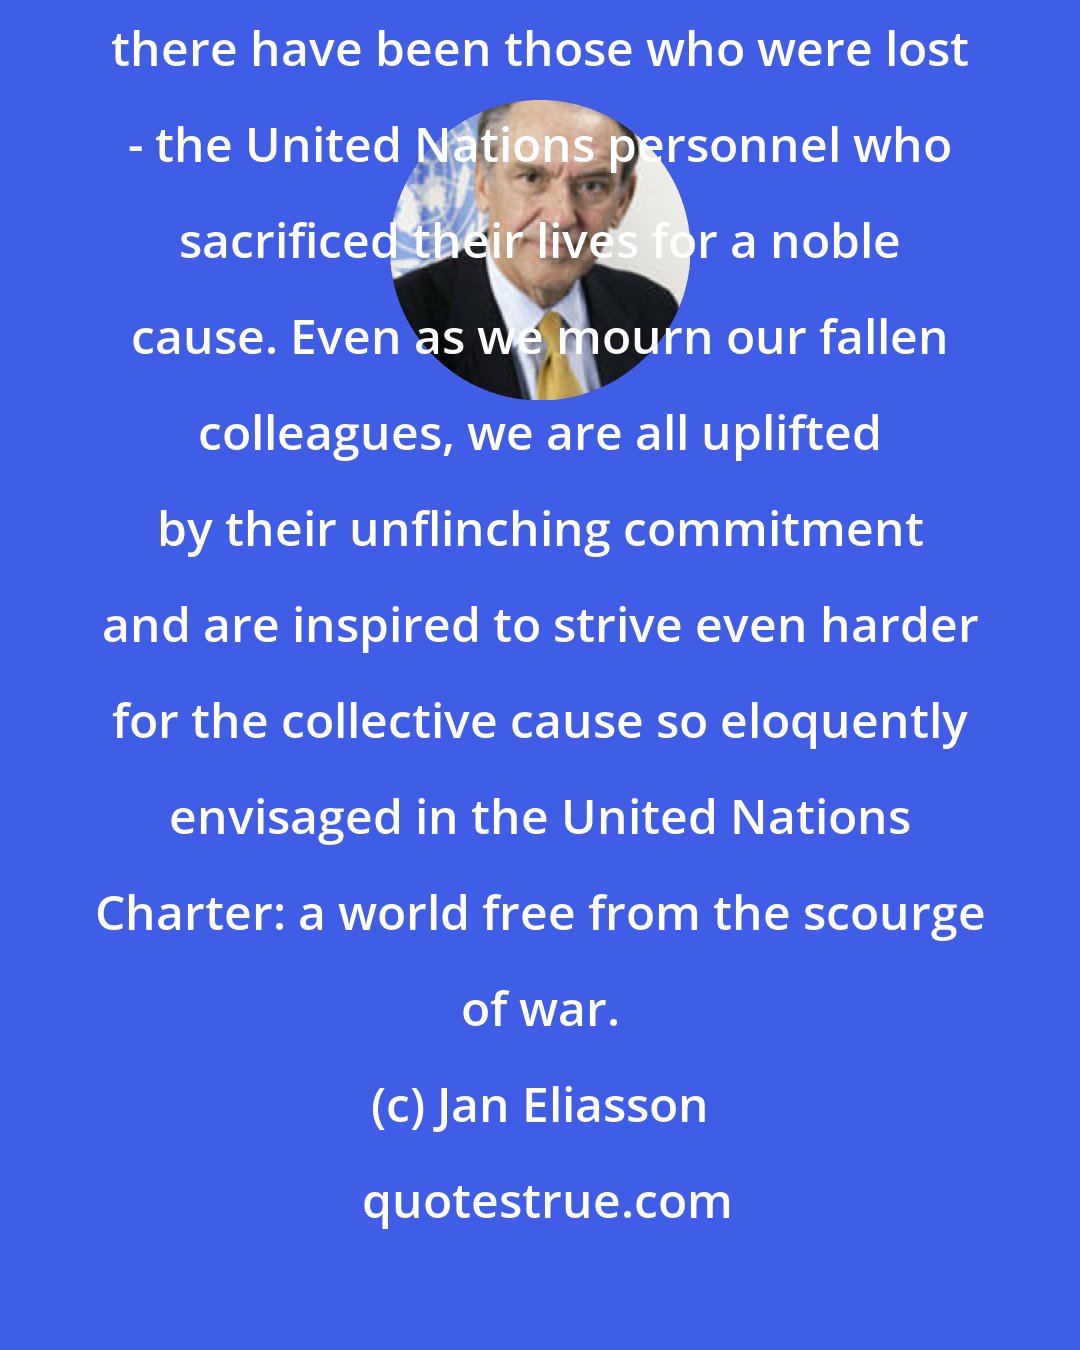 Jan Eliasson: For all the civilians saved thanks to the presence of peacekeepers, there have been those who were lost - the United Nations personnel who sacrificed their lives for a noble cause. Even as we mourn our fallen colleagues, we are all uplifted by their unflinching commitment and are inspired to strive even harder for the collective cause so eloquently envisaged in the United Nations Charter: a world free from the scourge of war.